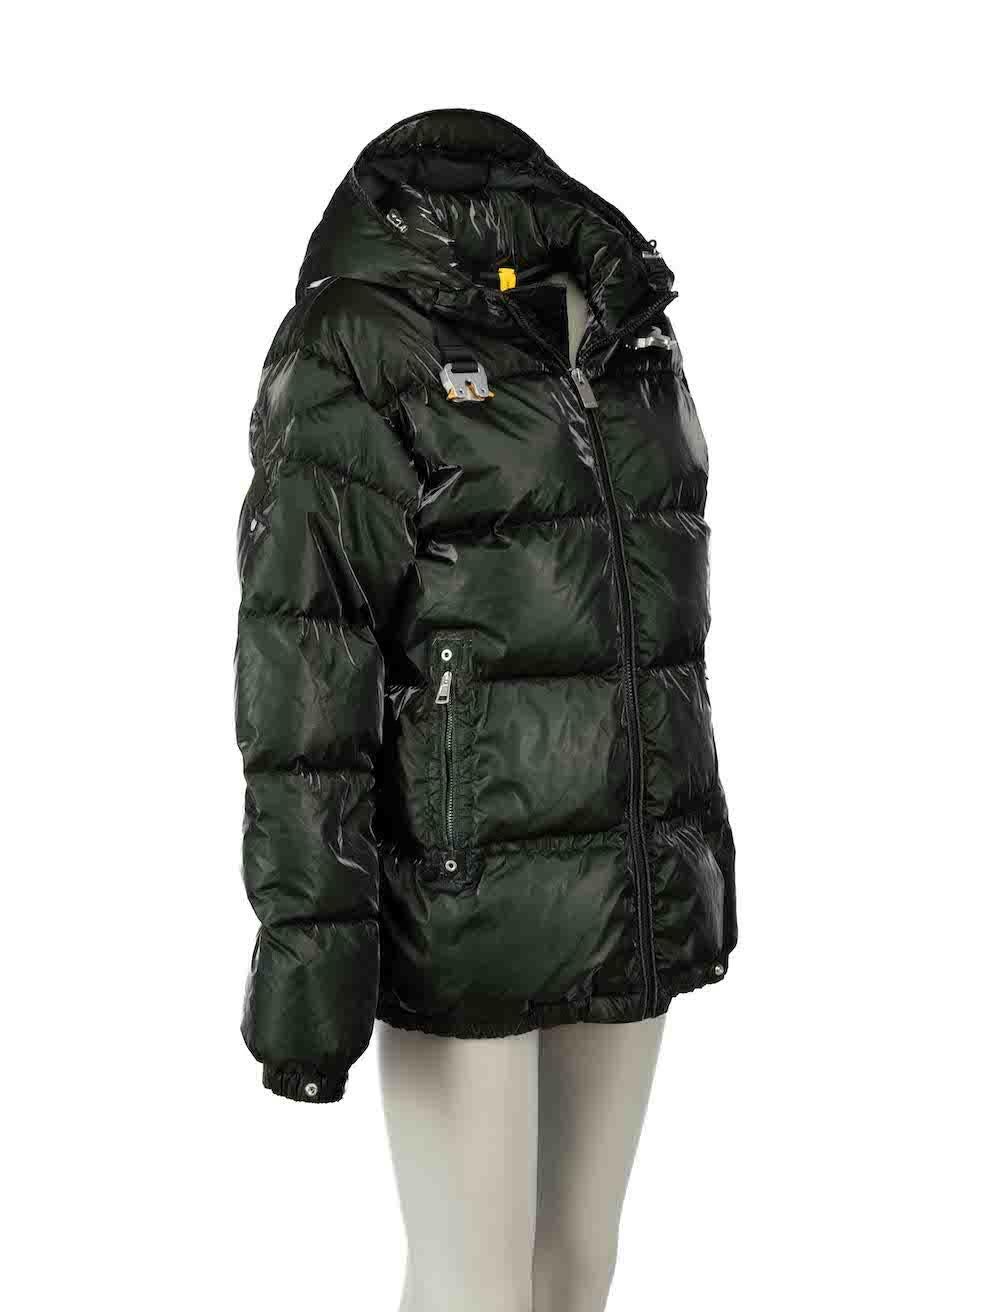 CONDITION is Very good. Hardly any visible wear to jacket is evident on this used Moncler designer resale item.

Details
1017 ALYX 9SM Almondis Shell
Green
Synthetic
Down puffer jacket
Quilted
Hooded
Zip fastening
2x Side pockets
2x Internal